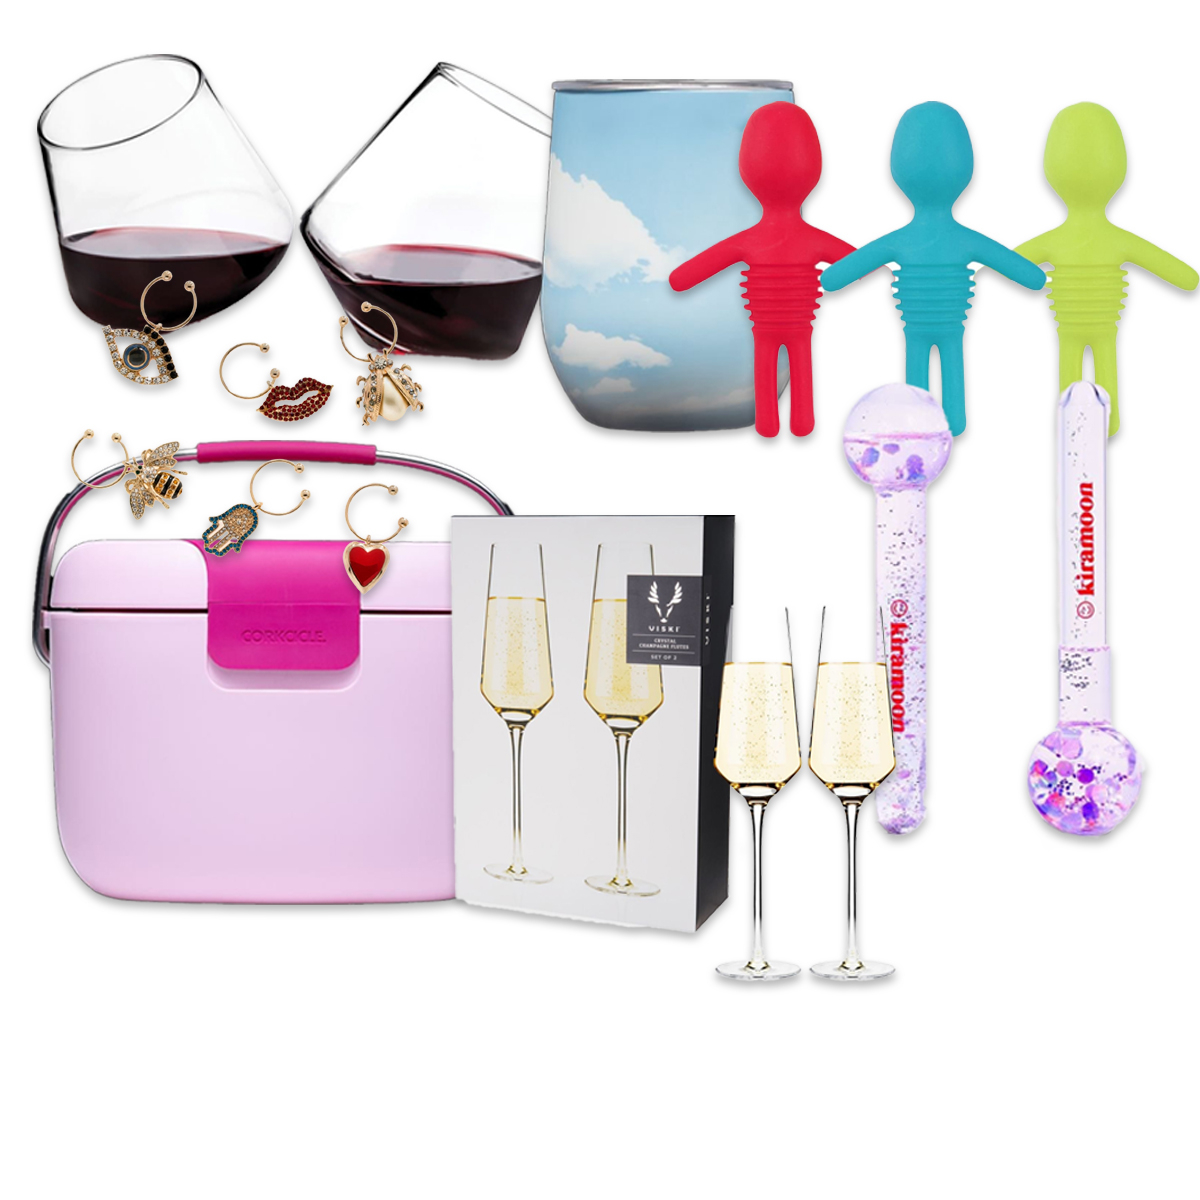 Say Cheers to National Drink Wine Day With These 15 Wine Glasses, Champagne Flutes & Accessories – E! Online